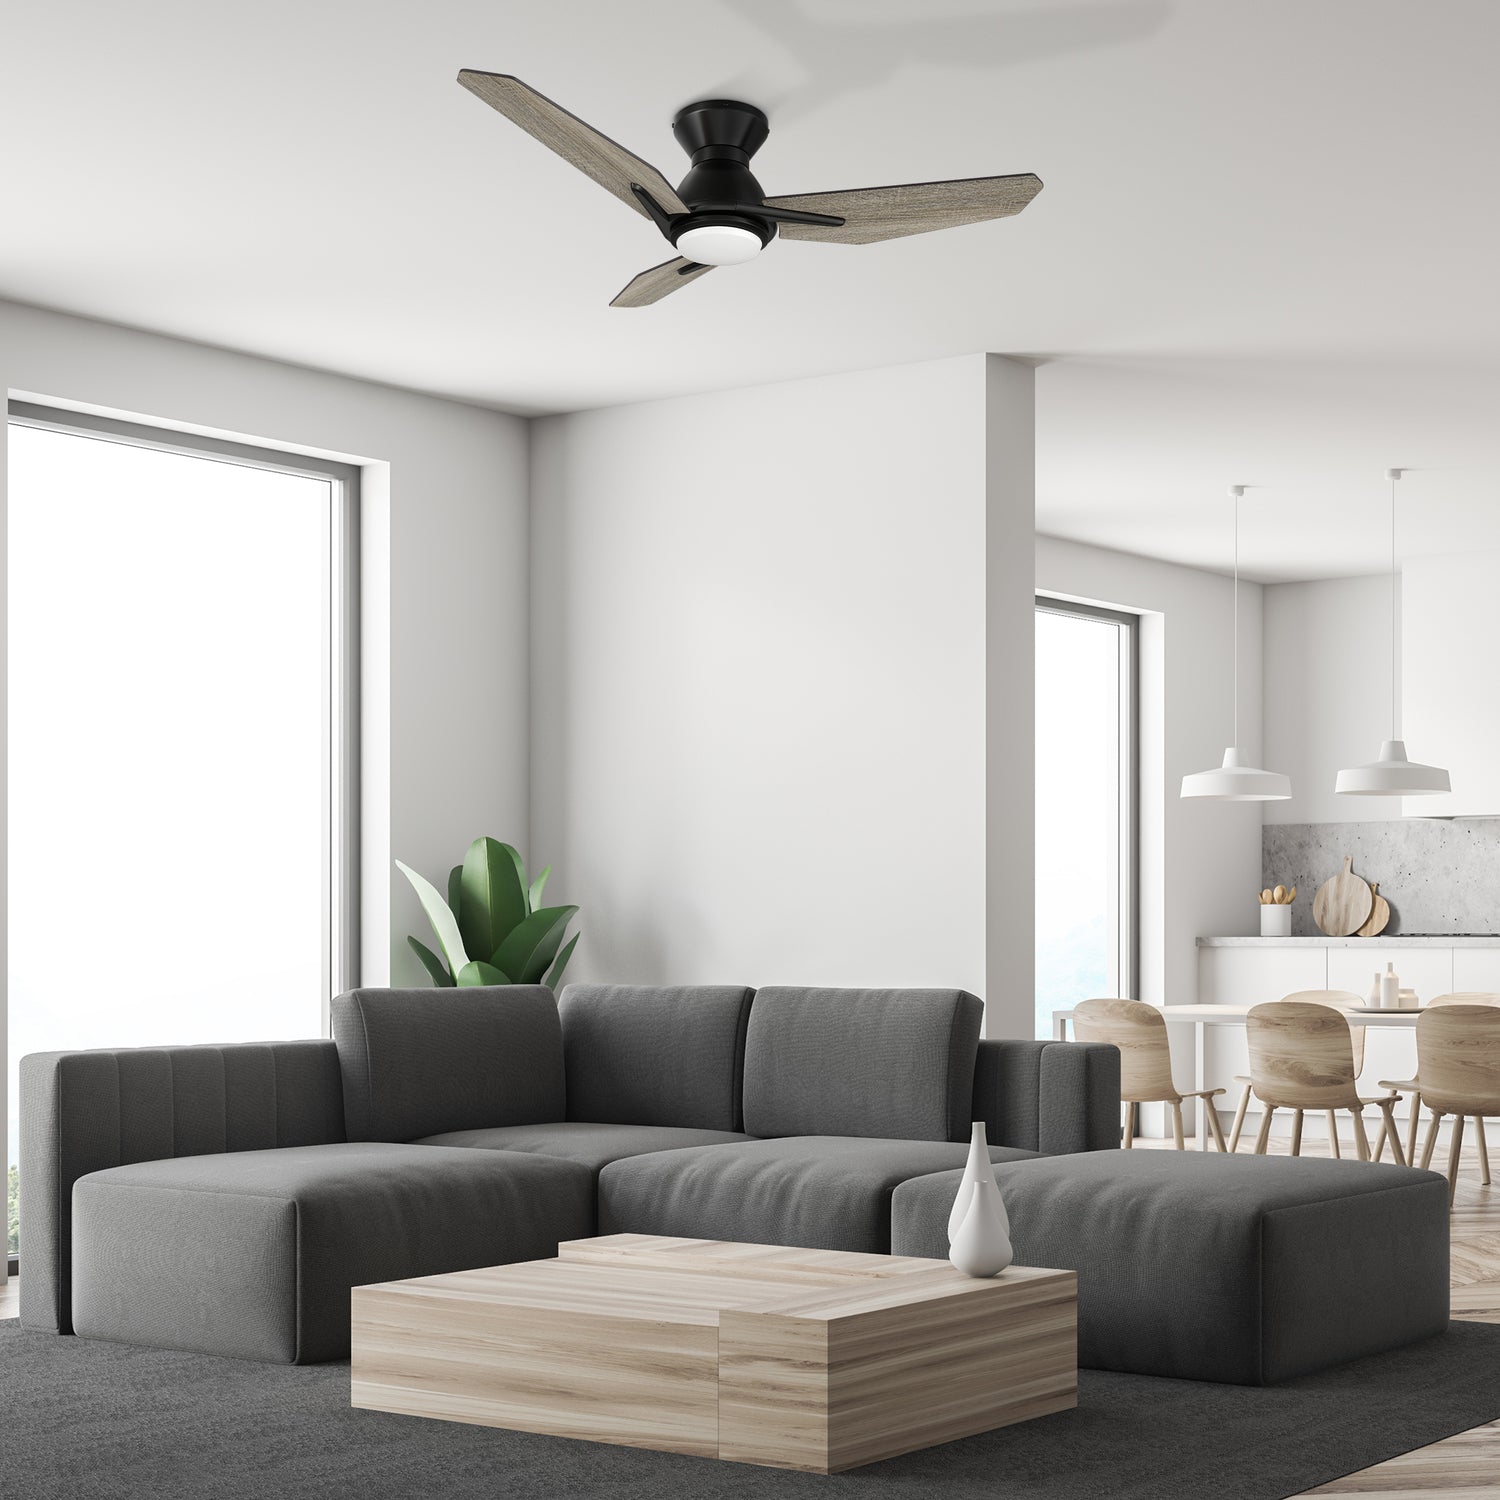 Carro Vant 44 inch ceiling fan with light, low profile design with 3 wooden plywood blades, installed in a livingroom. 